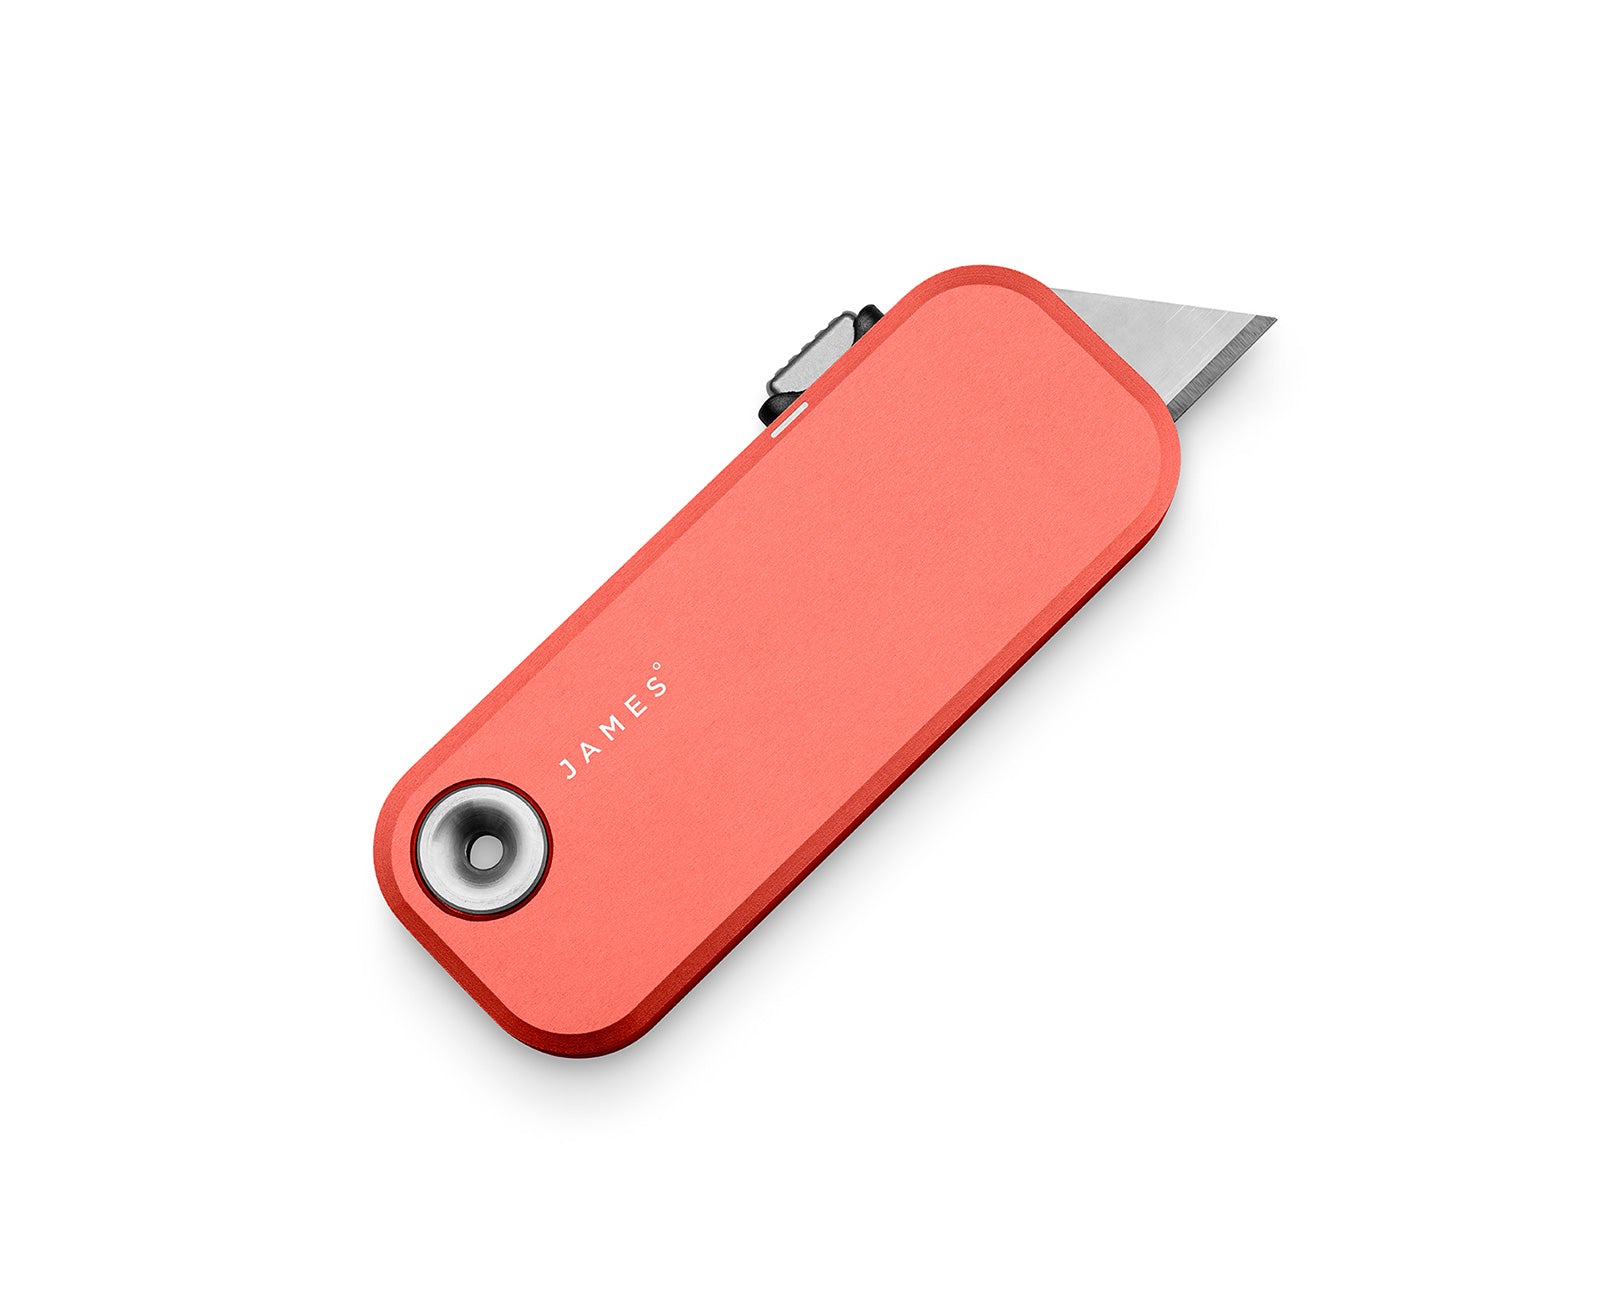 The Palmer knife with coral colored case.